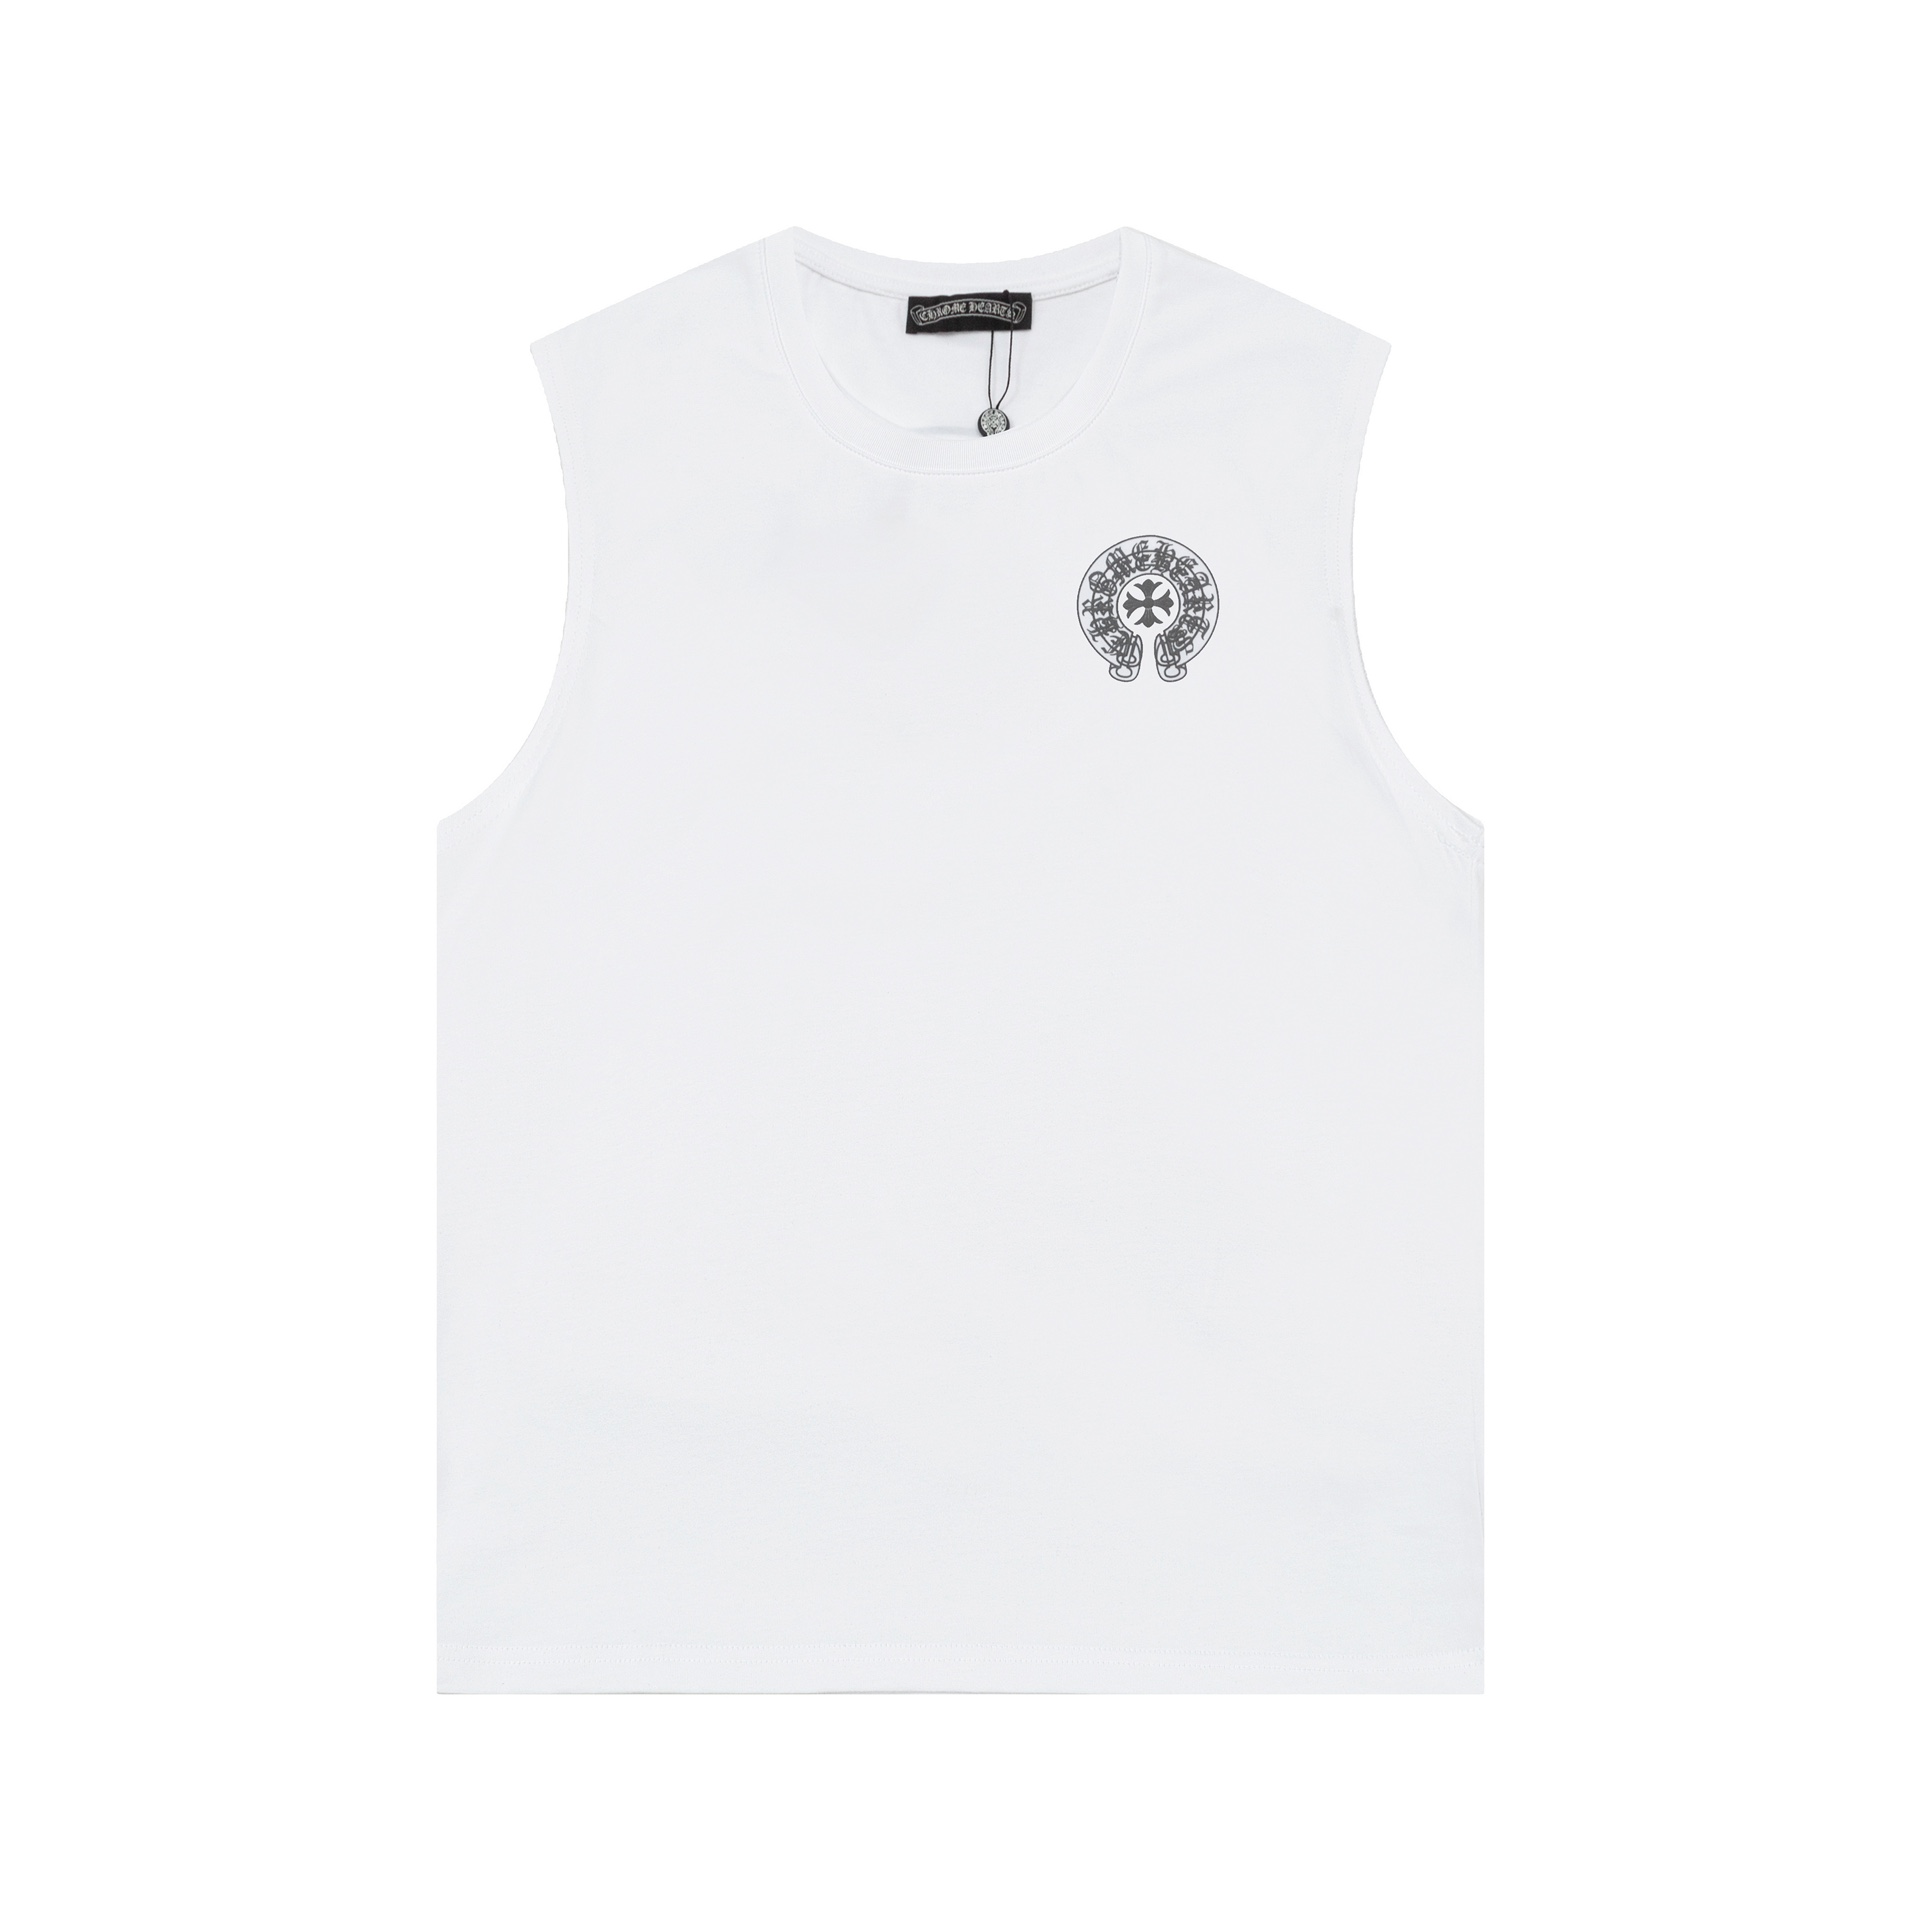 Chrome Hearts Clothing Tank Tops&Camis Waistcoats Perfect Replica
 White Printing Unisex Spring/Summer Collection Fashion